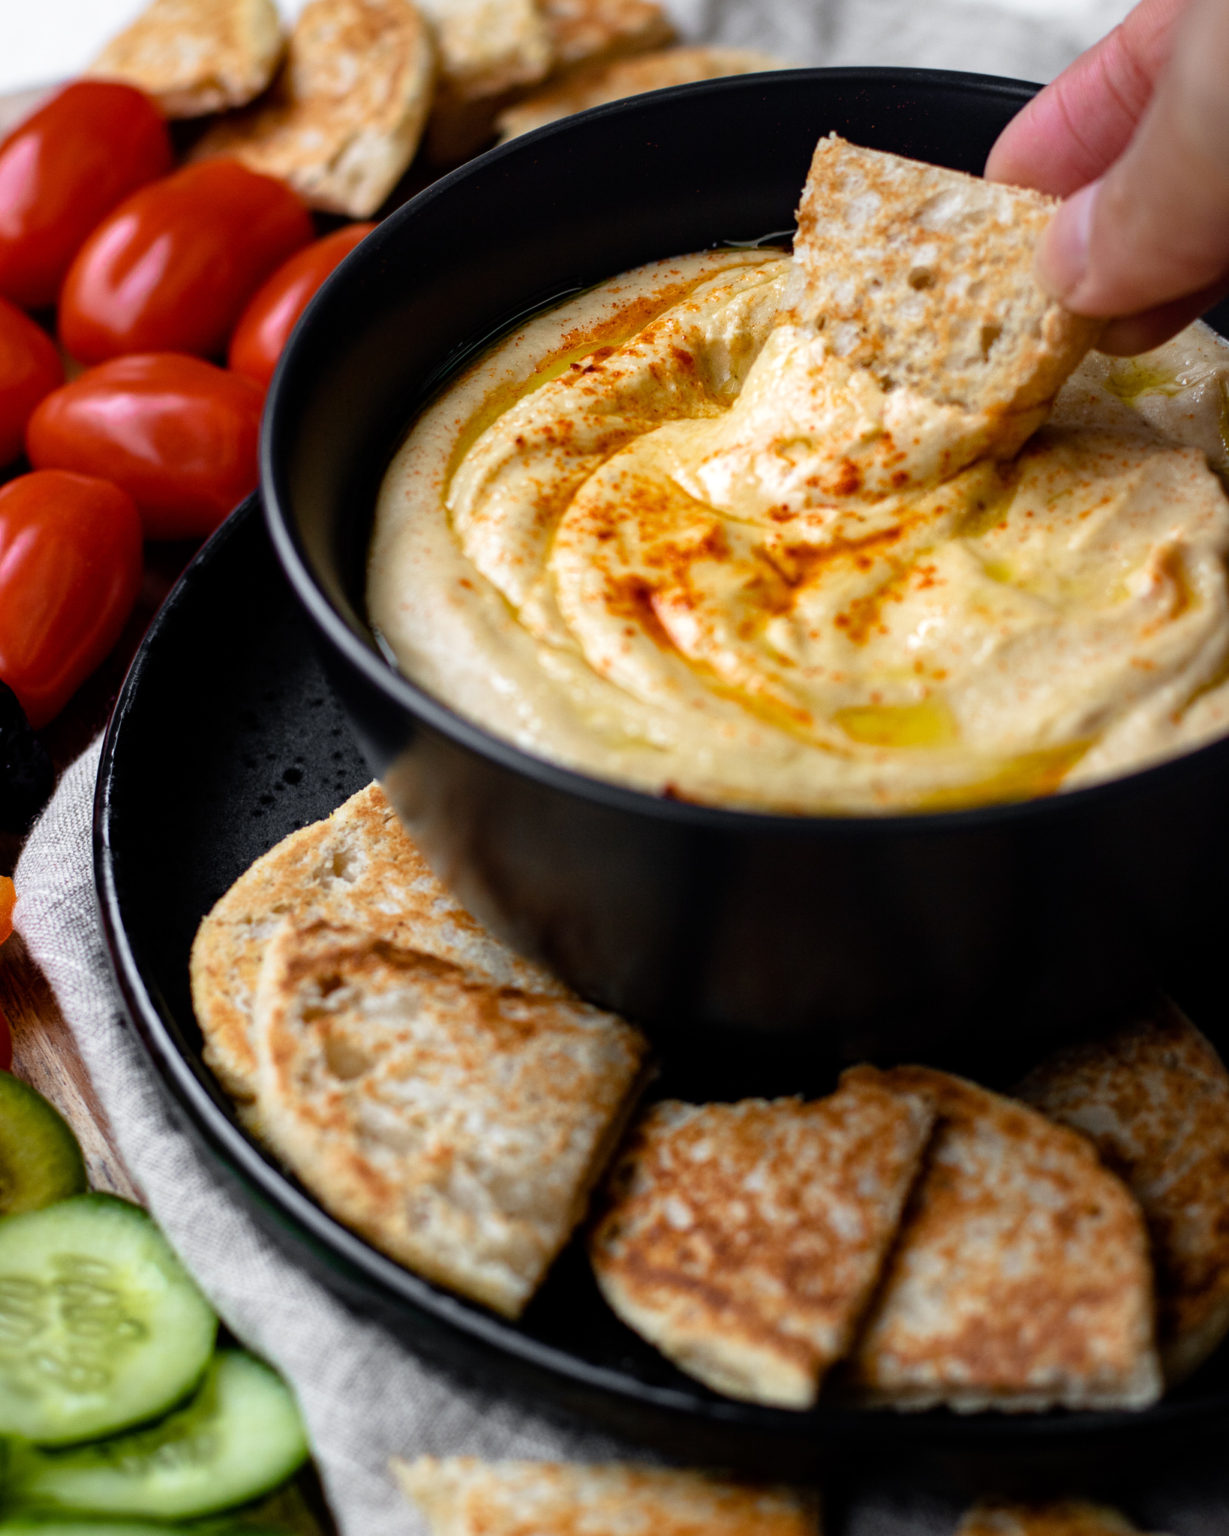 Smoothest hummus dip - My Family's Food Diary